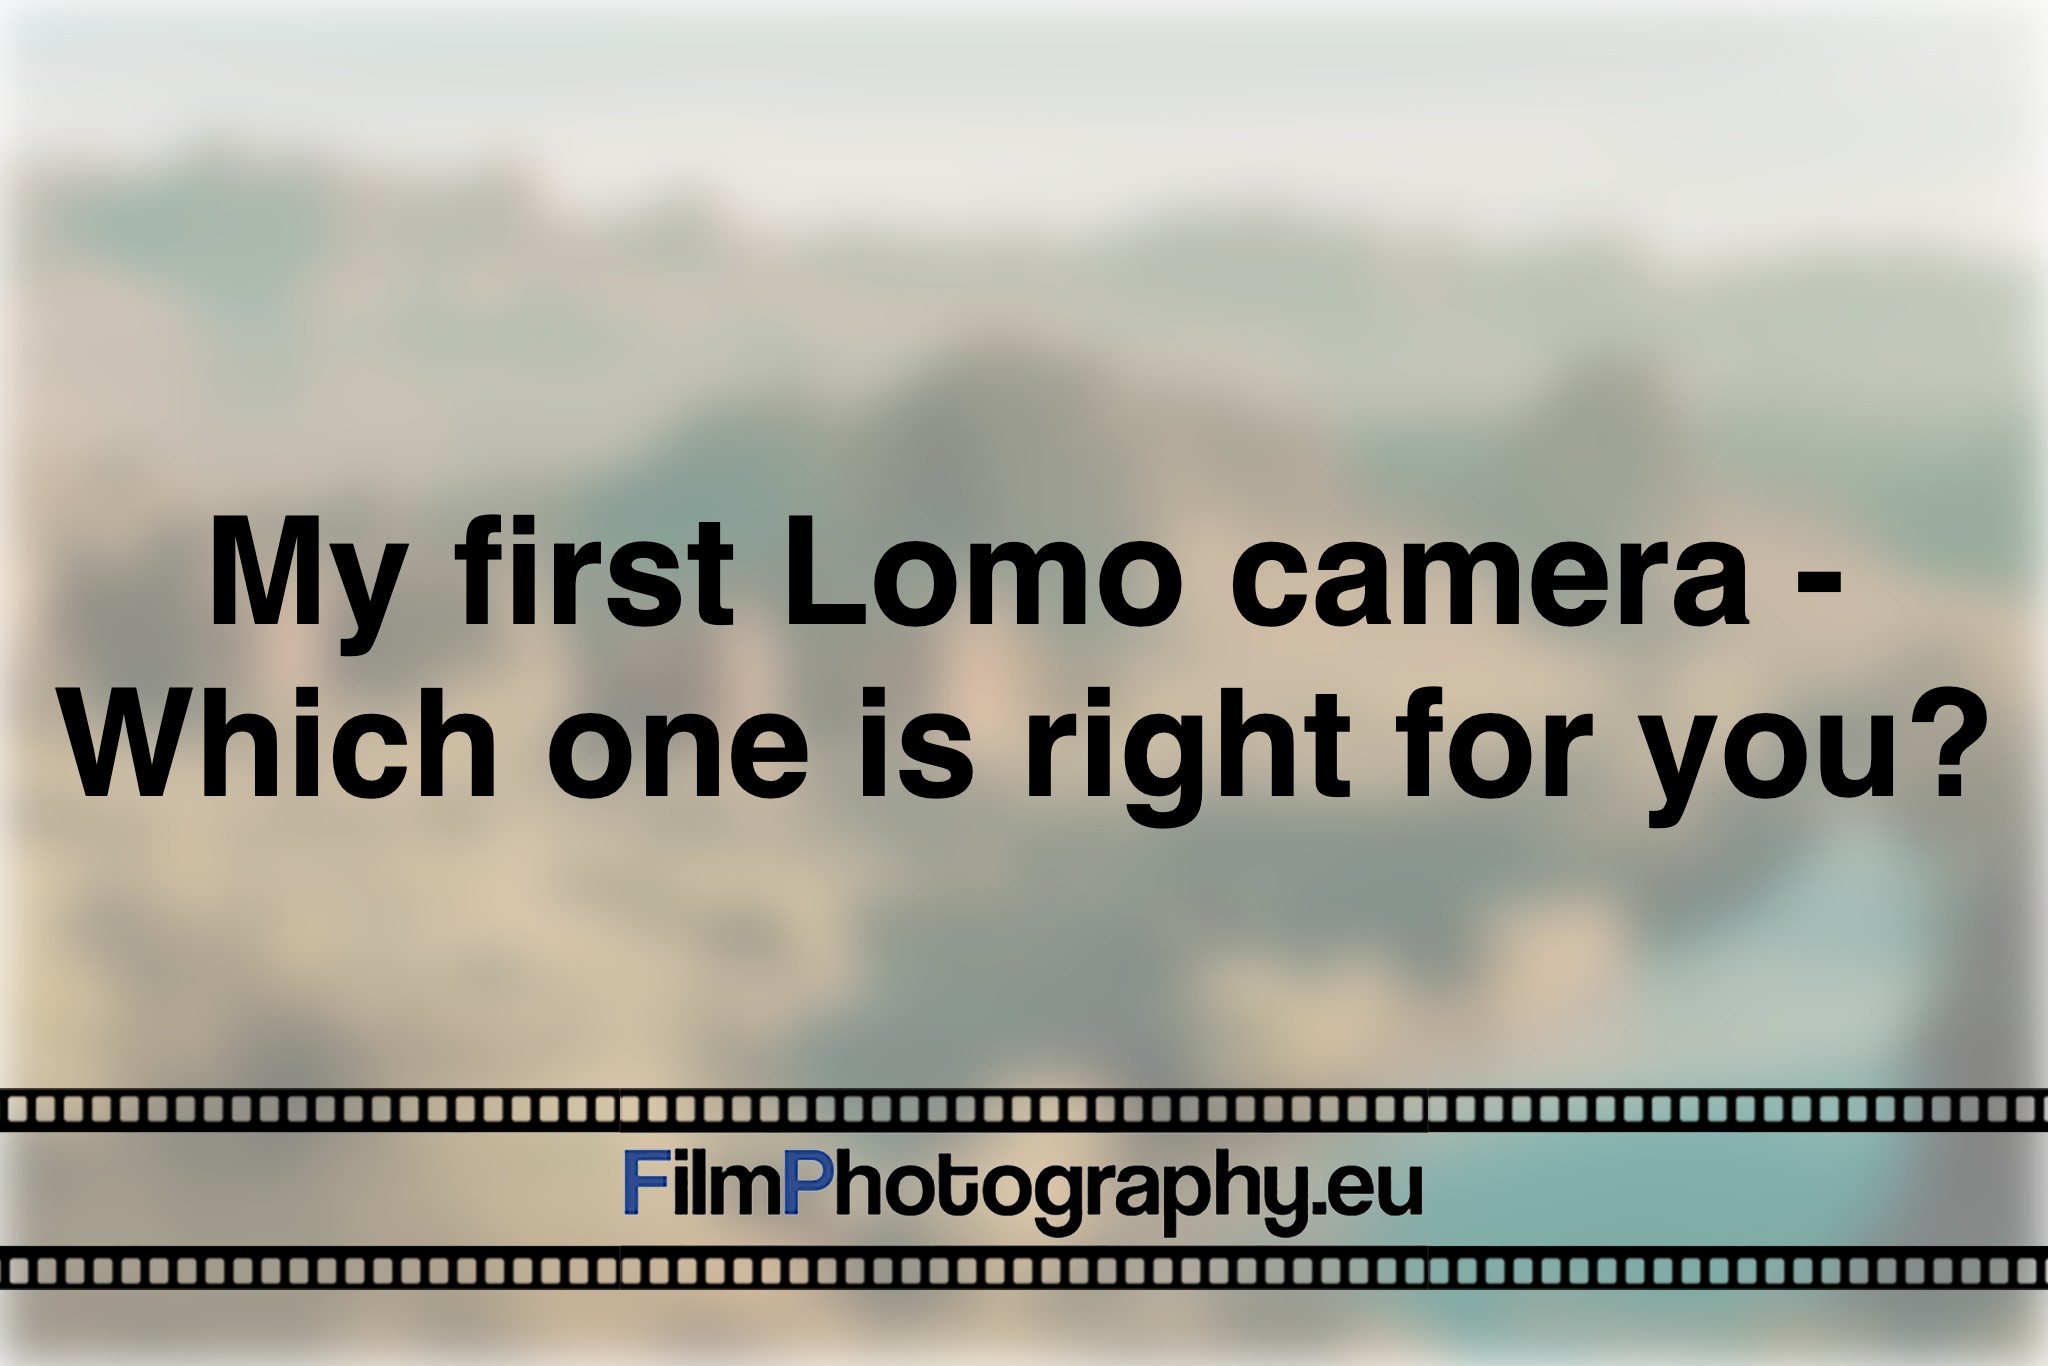 my-first-lomo-camera-which-one-is-right-for-you-photo-bnv